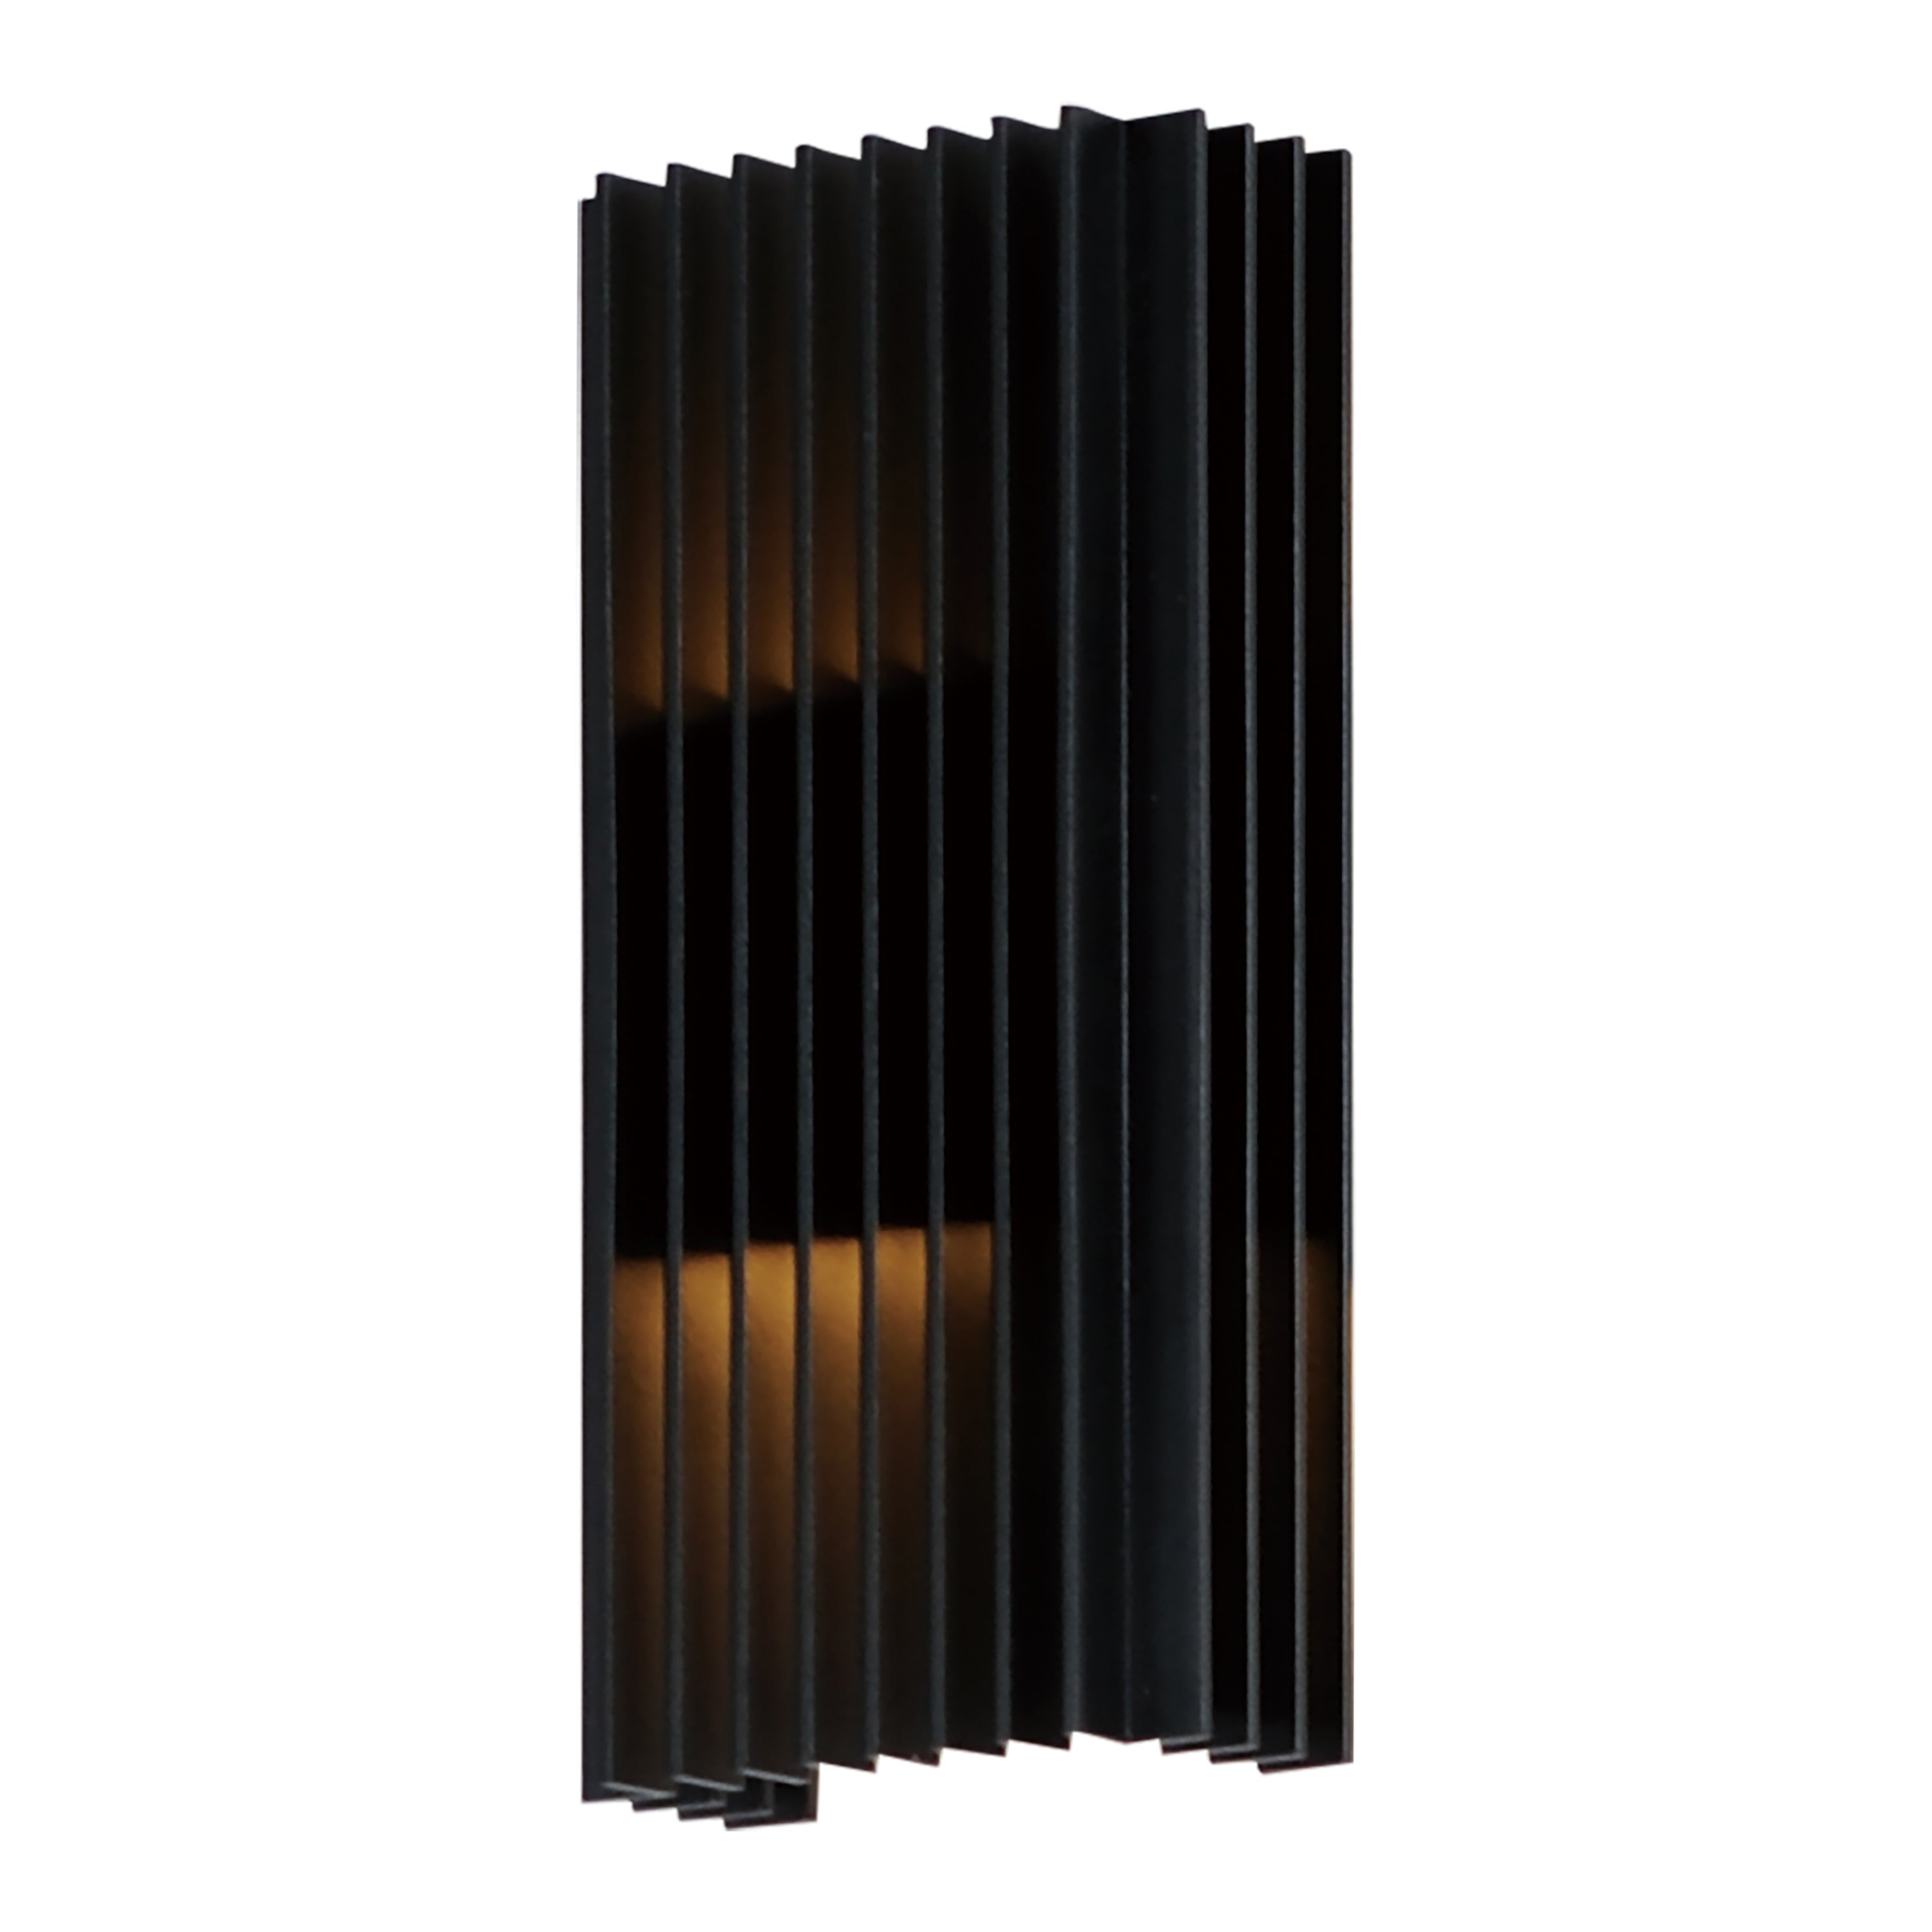 RAMPART Outdoor wall sconce Black INTEGRATED LED - E30114-BK | MAXIM/ET3